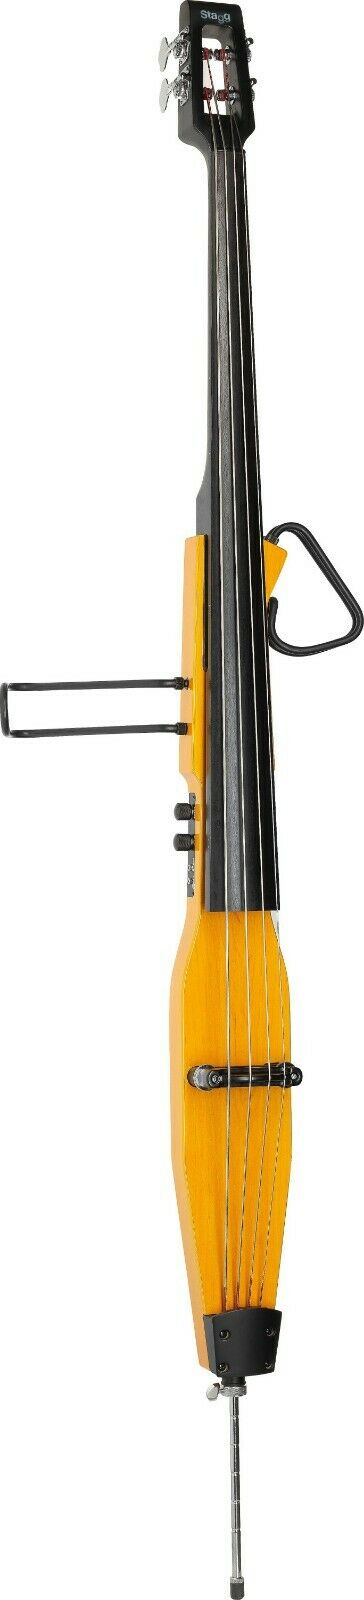 Stagg EDB-3/4 H Electric 3/4 Size Double Bass with Gigbag Included - Honey